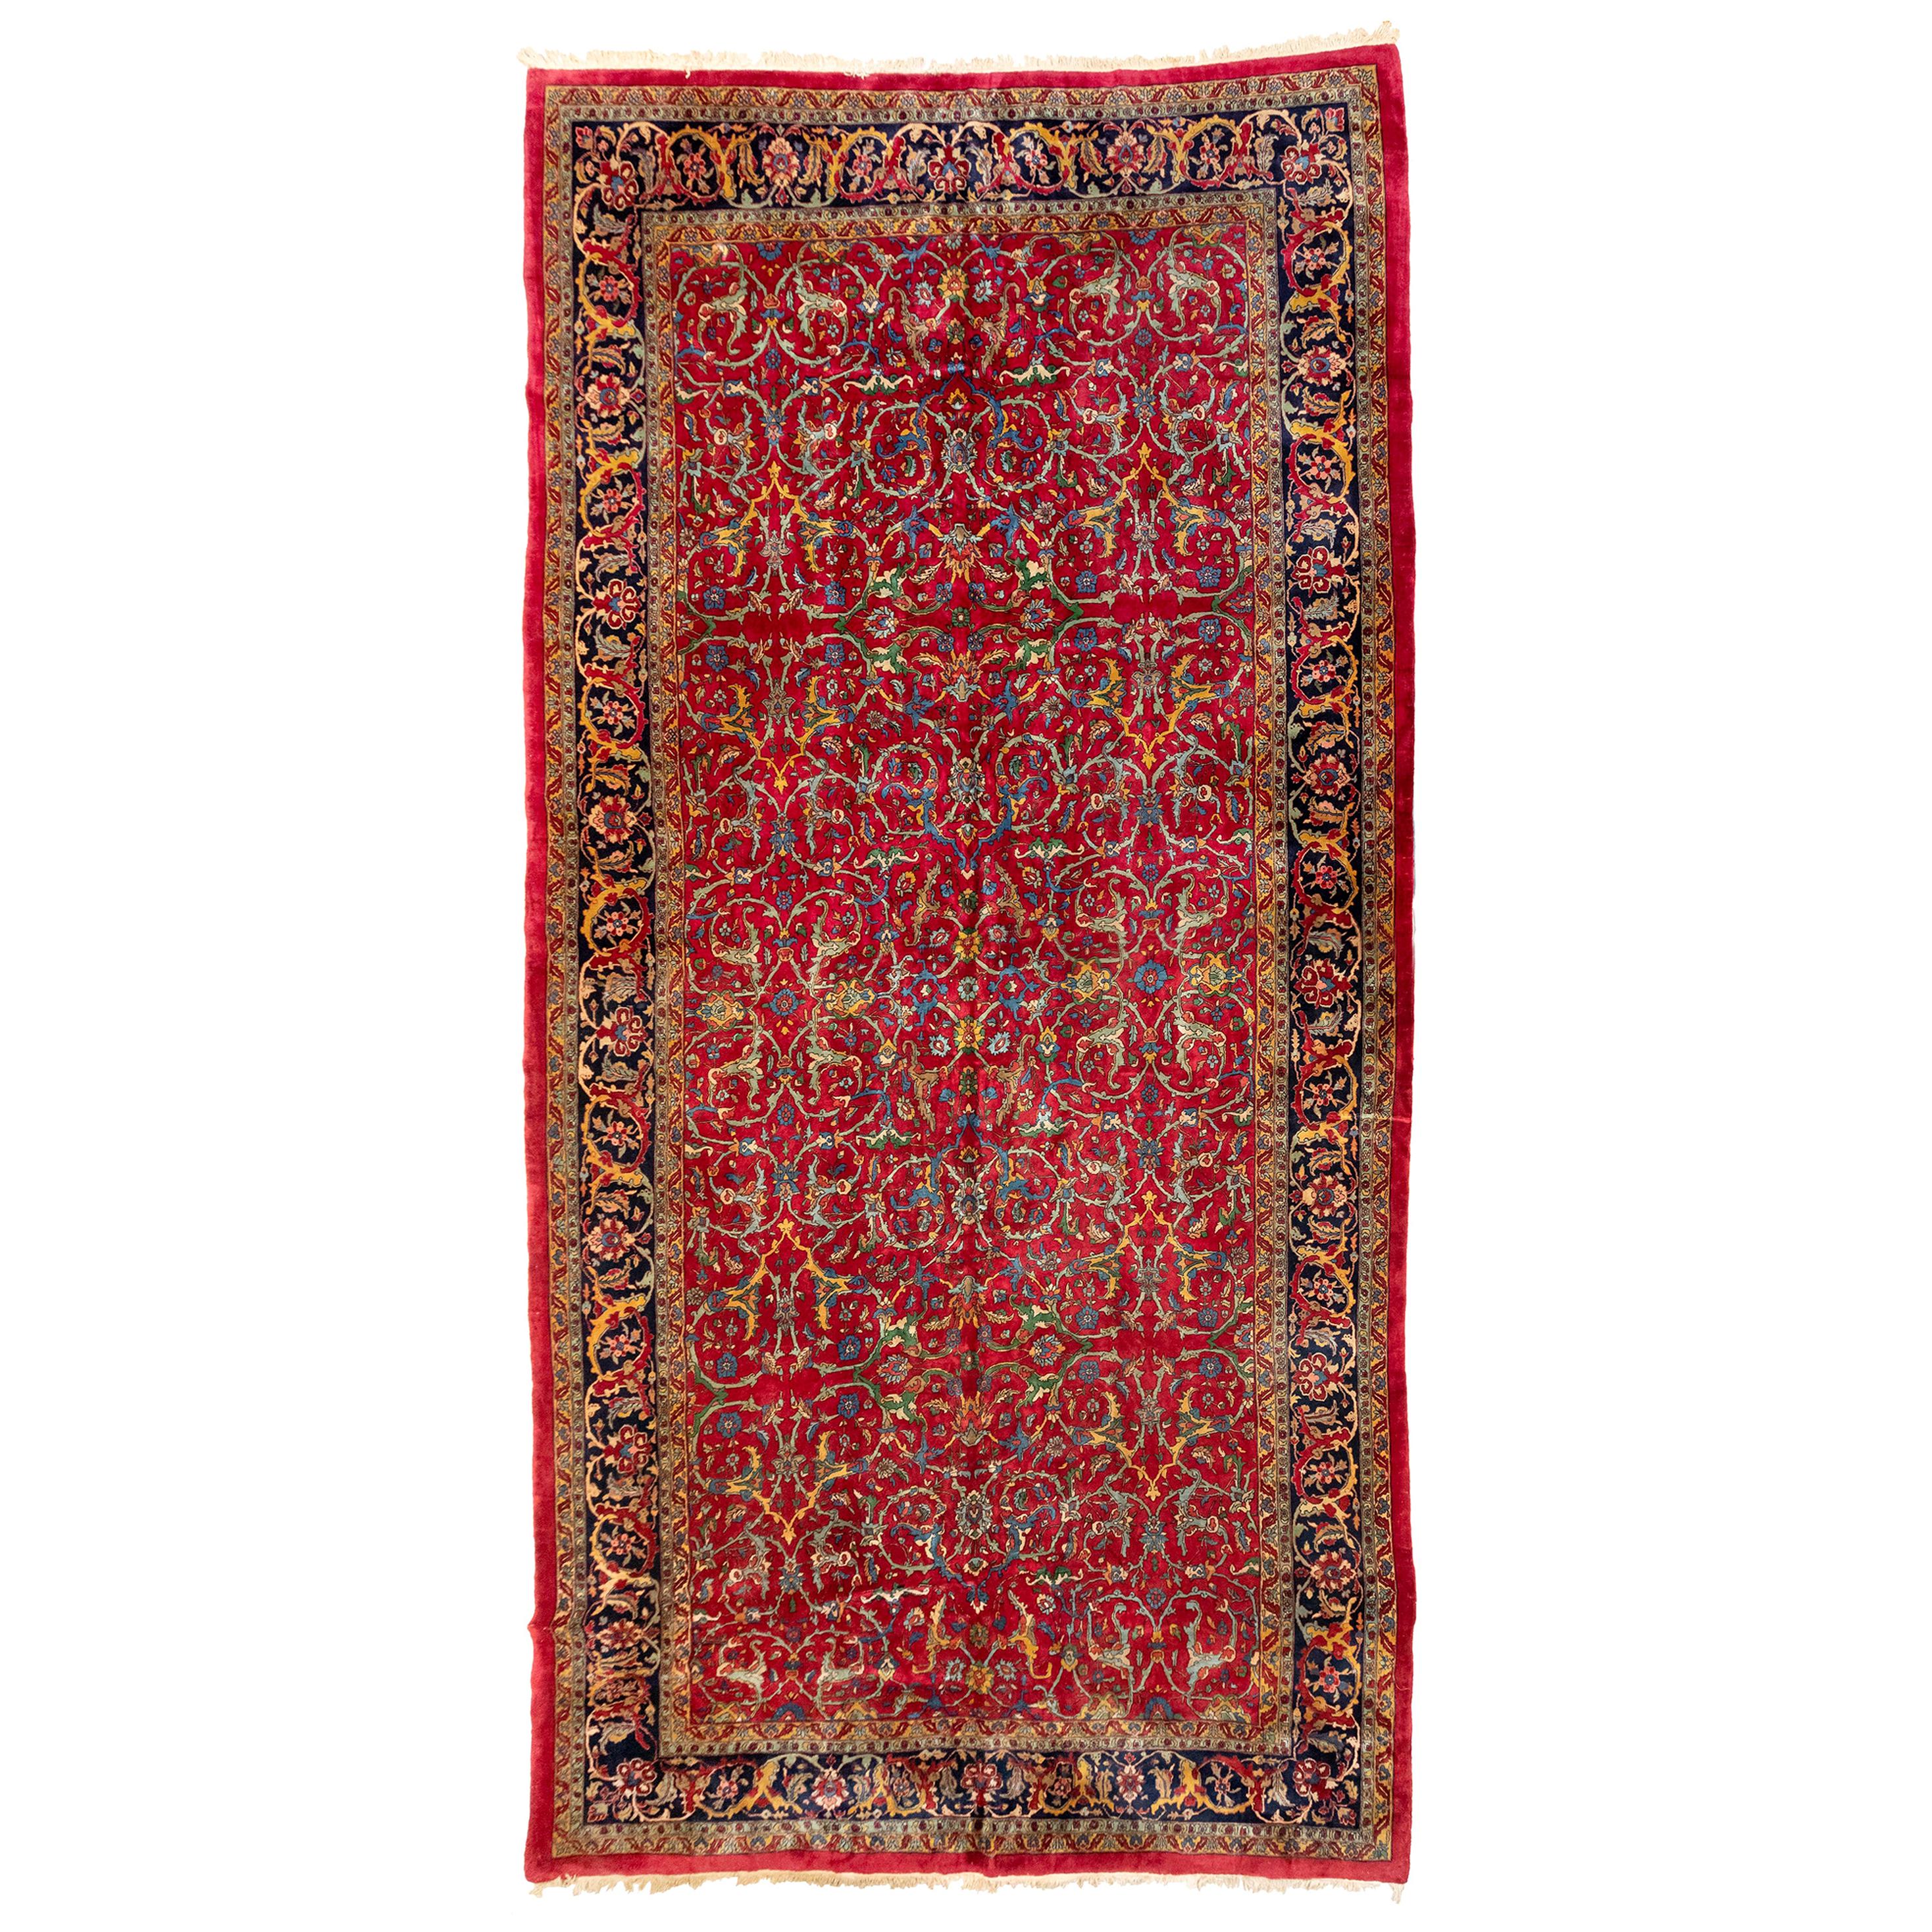 Oversize Antique Persian Floral Red Sarouk Rug c. 1880-1900 (12.6 x 22.9 ft) For Sale